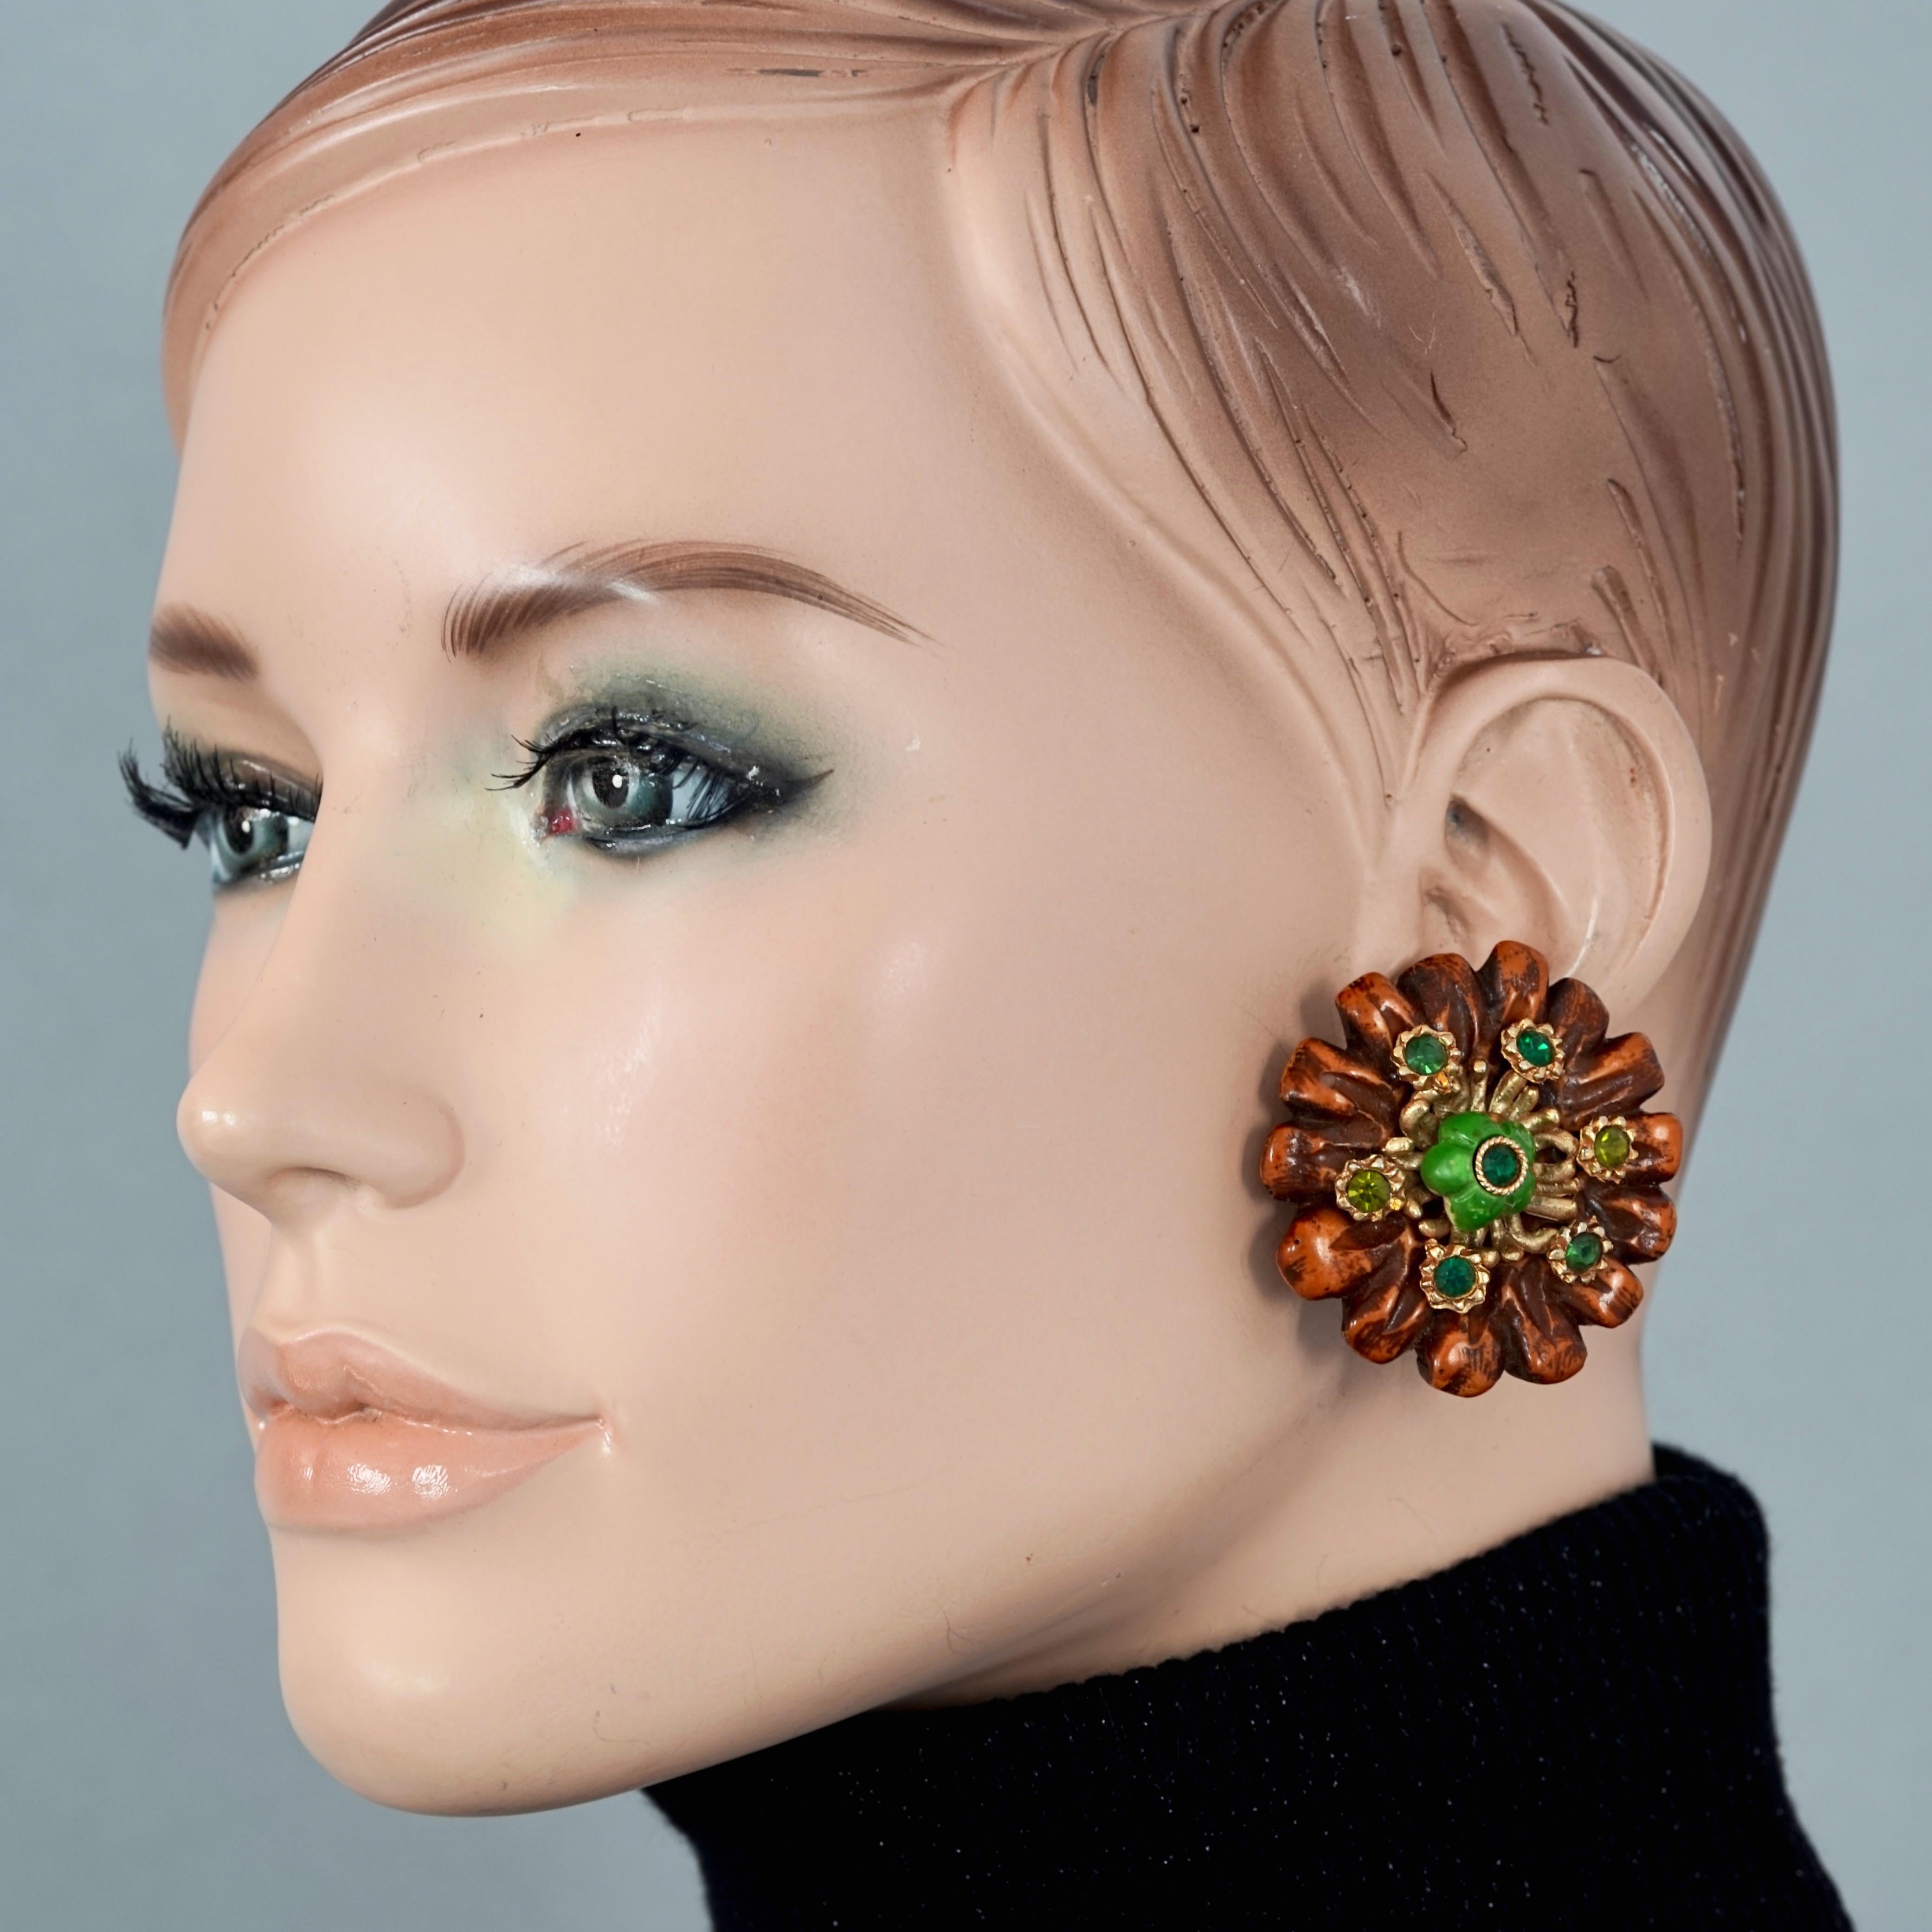 Vintage Massive JACKY DE G Flower Resin with Rhinestones Earrings

Measurements:
Height: 1.73 inches (4.4 cm)
Width: 1.73 inches (4.4 cm)
Weight per Earring: 15 grams

Features:
- 100% Authentic JACKY DE G.
- Massive flower resin earrings in wood